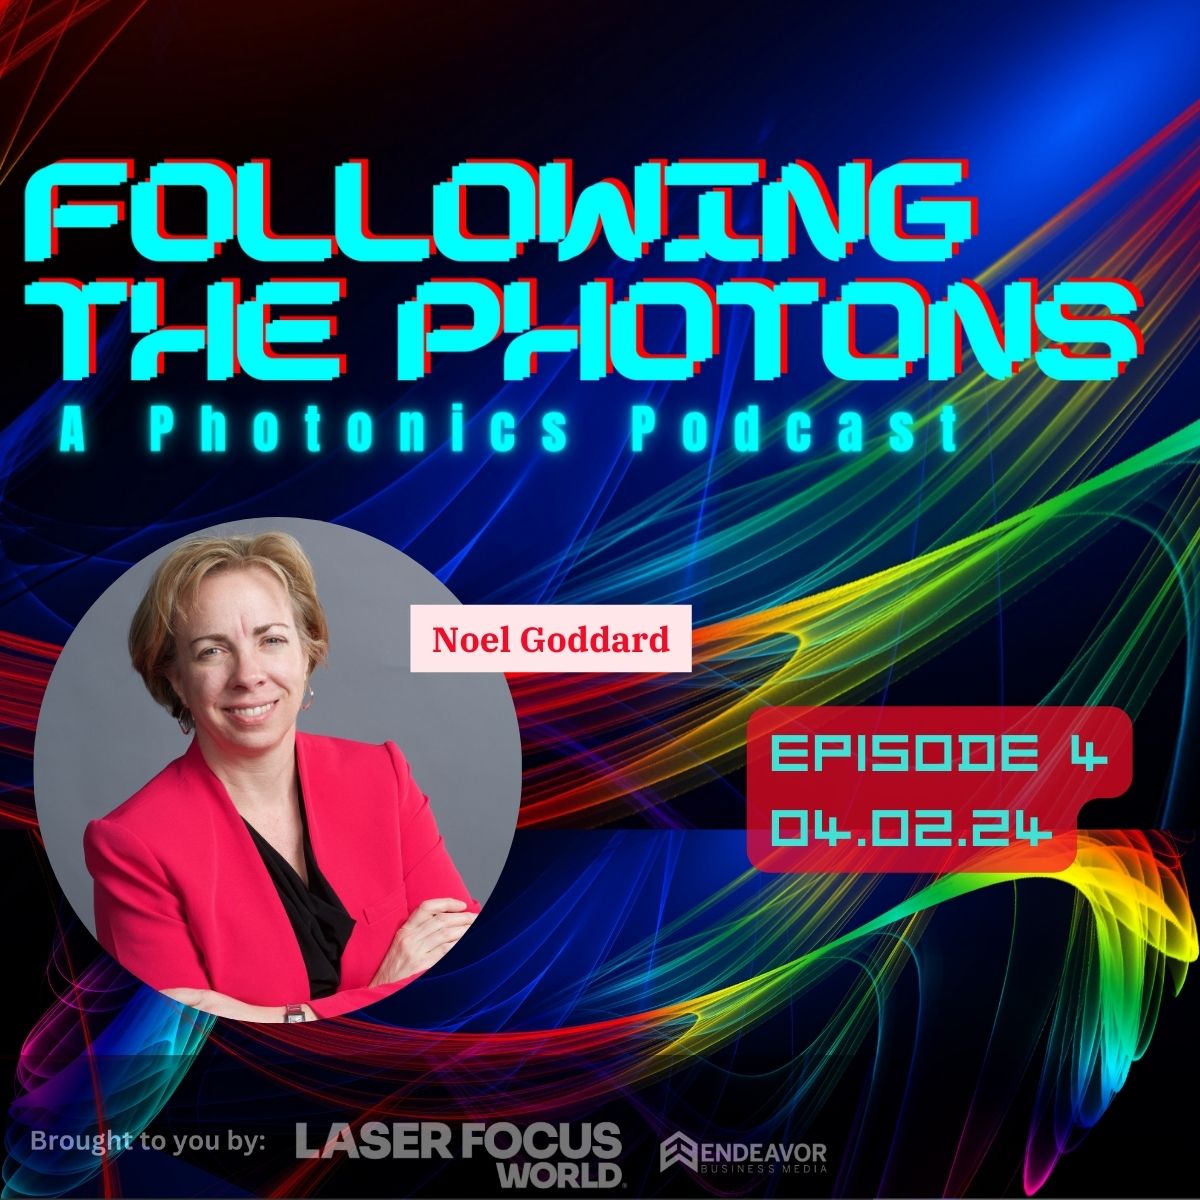 From traditional optics/photonics to the quantum realm, @NoelGoddard2, CEO of @QunnectInc, has done it all. And she's far from done. Listen to the new #FollowingthePhotons podcast to hear her intriguing perspectives 🎙-->bit.ly/3VDF45t
#LaserFocusWorld